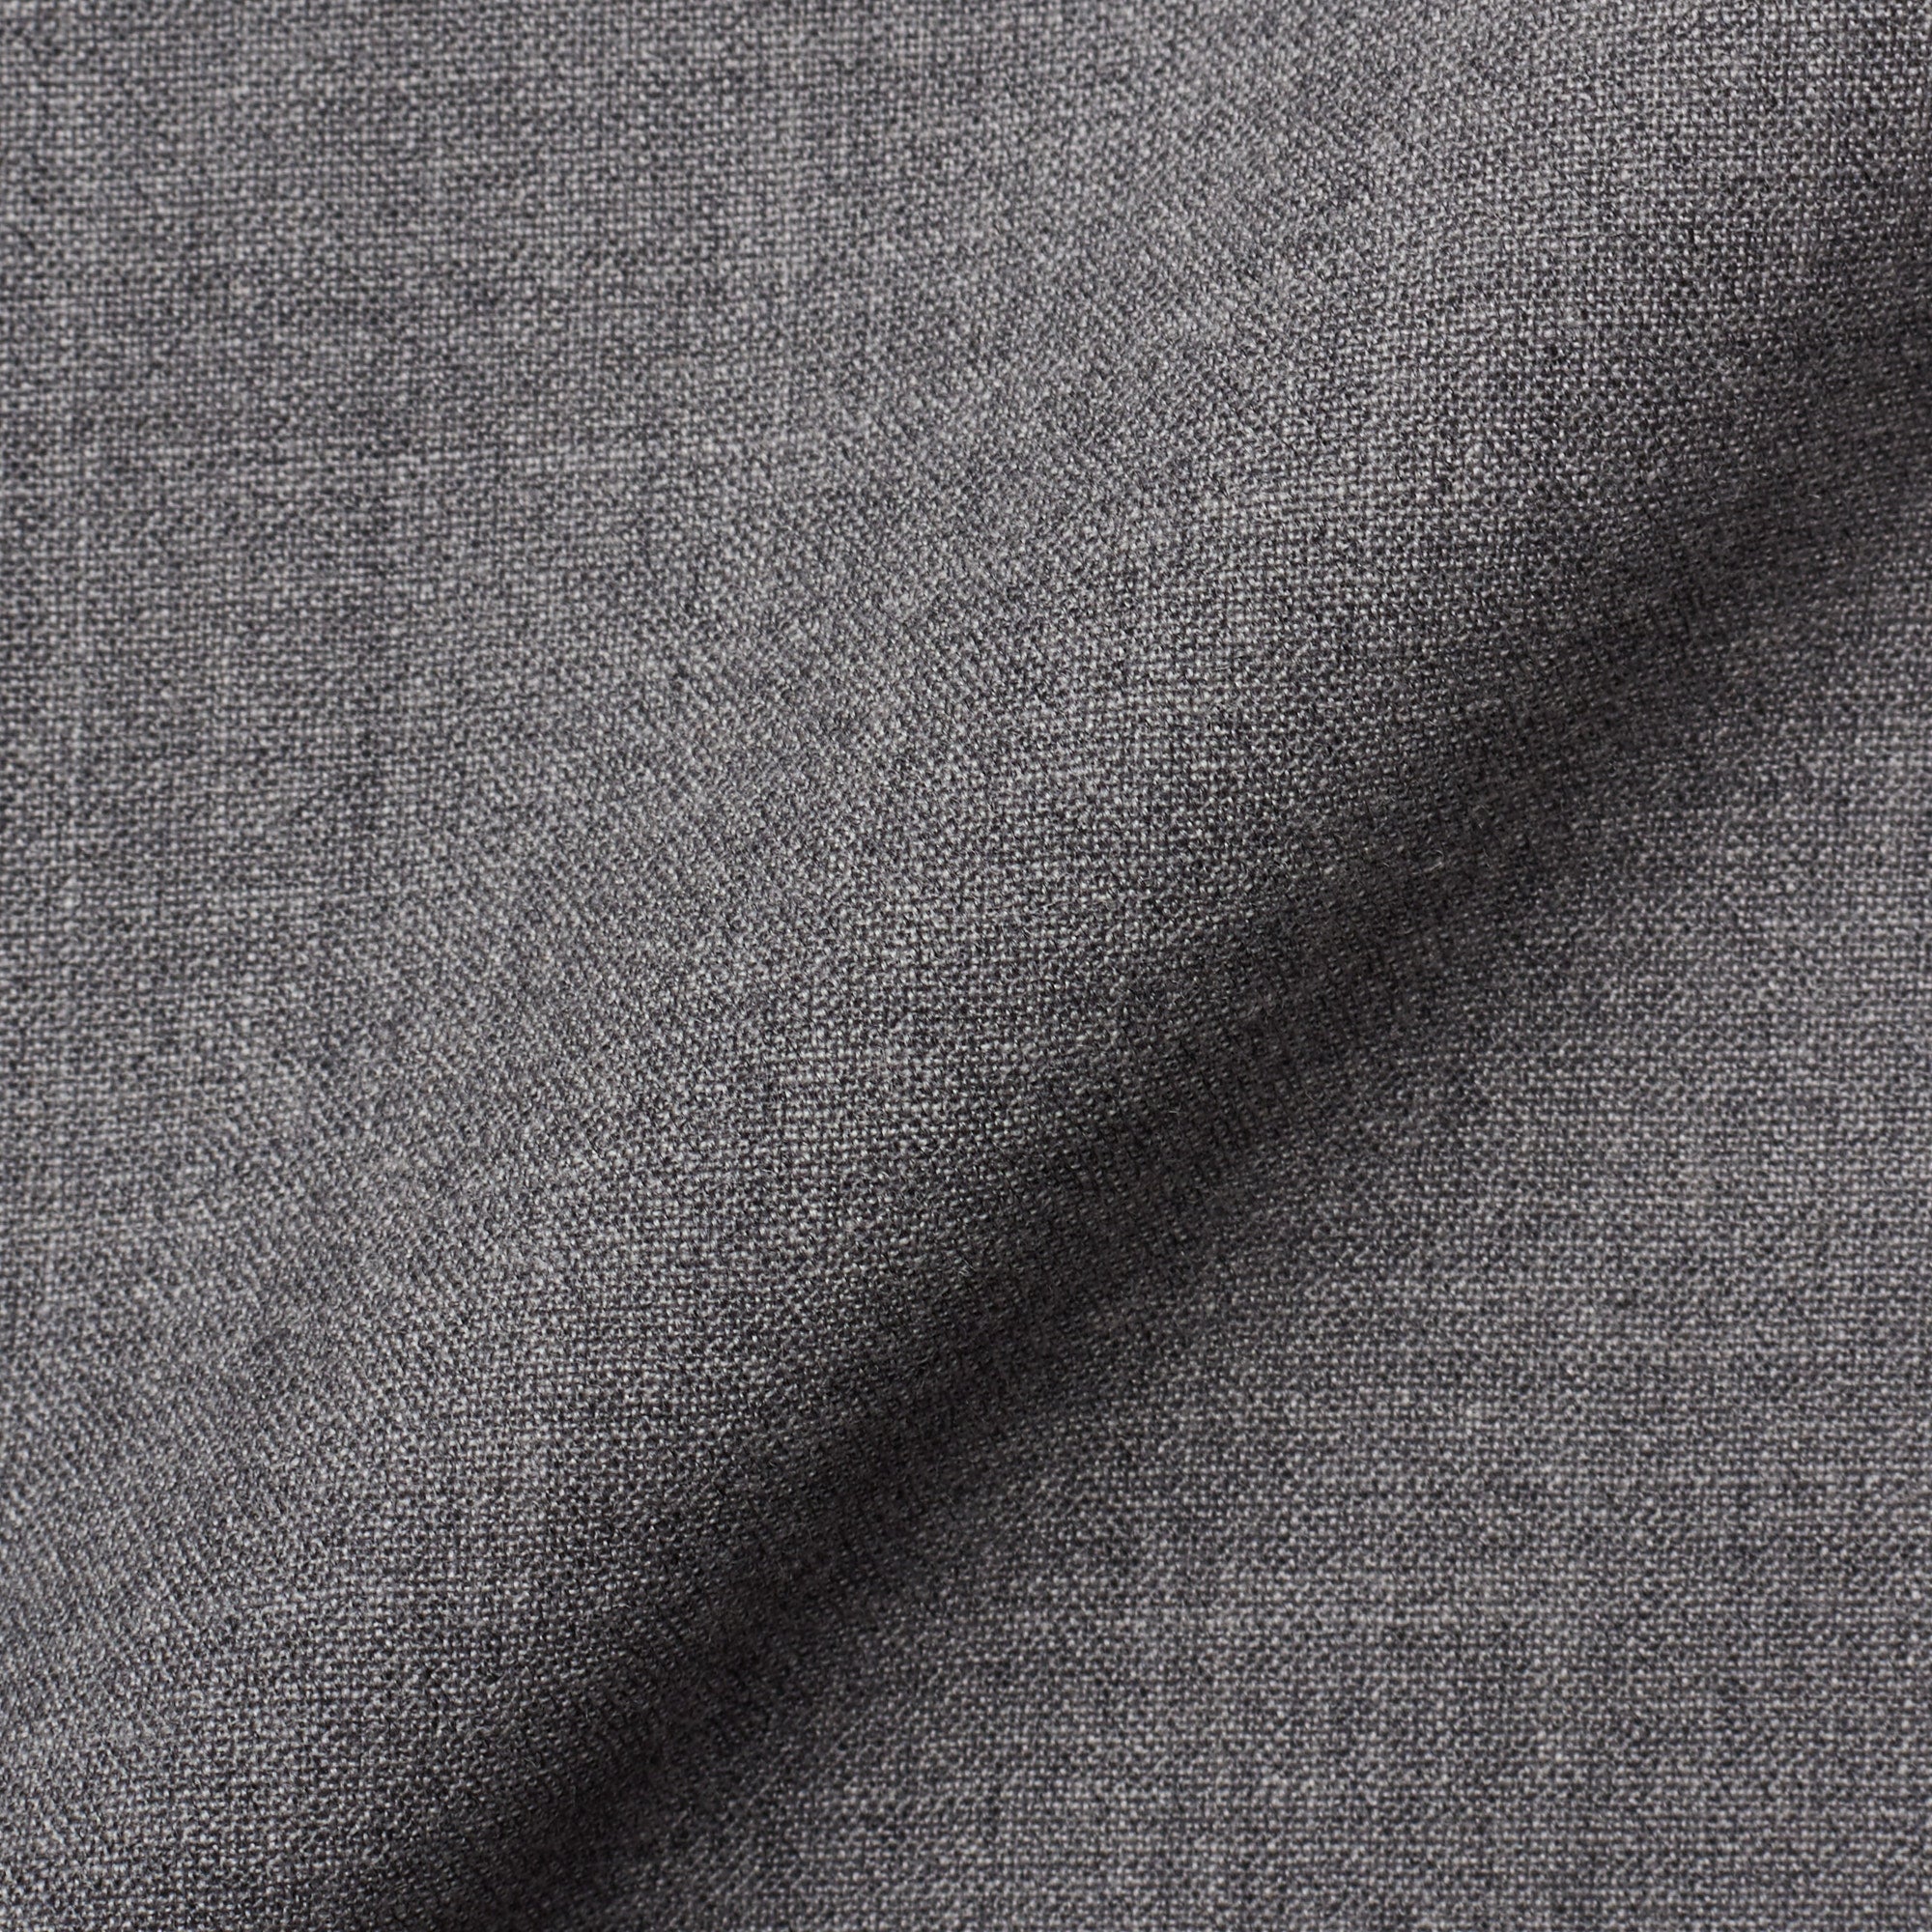 CESARE ATTOLINI Handmade Chambray Gray Wool Business Suit NEW